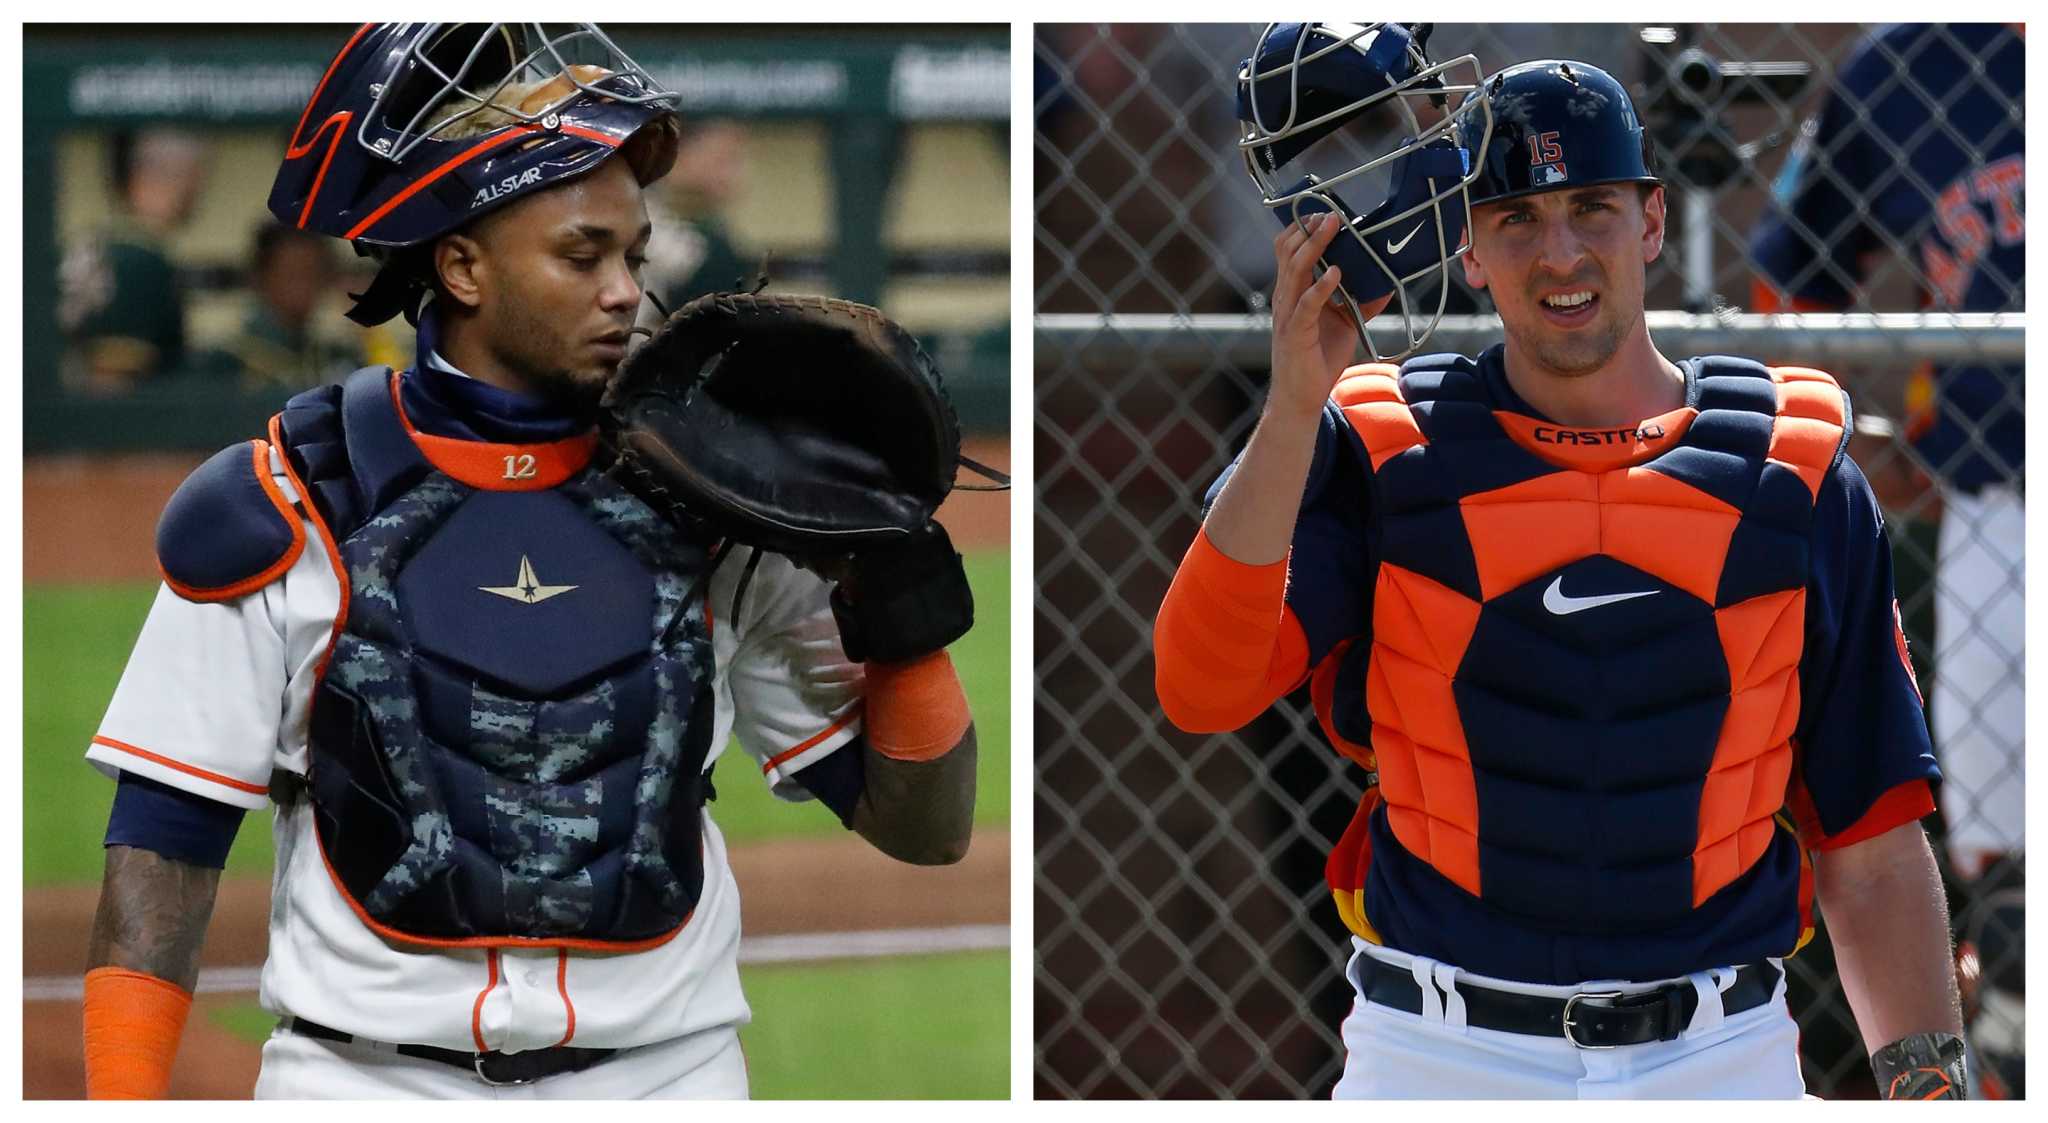 Leadership at catcher position comes into focus for Astros